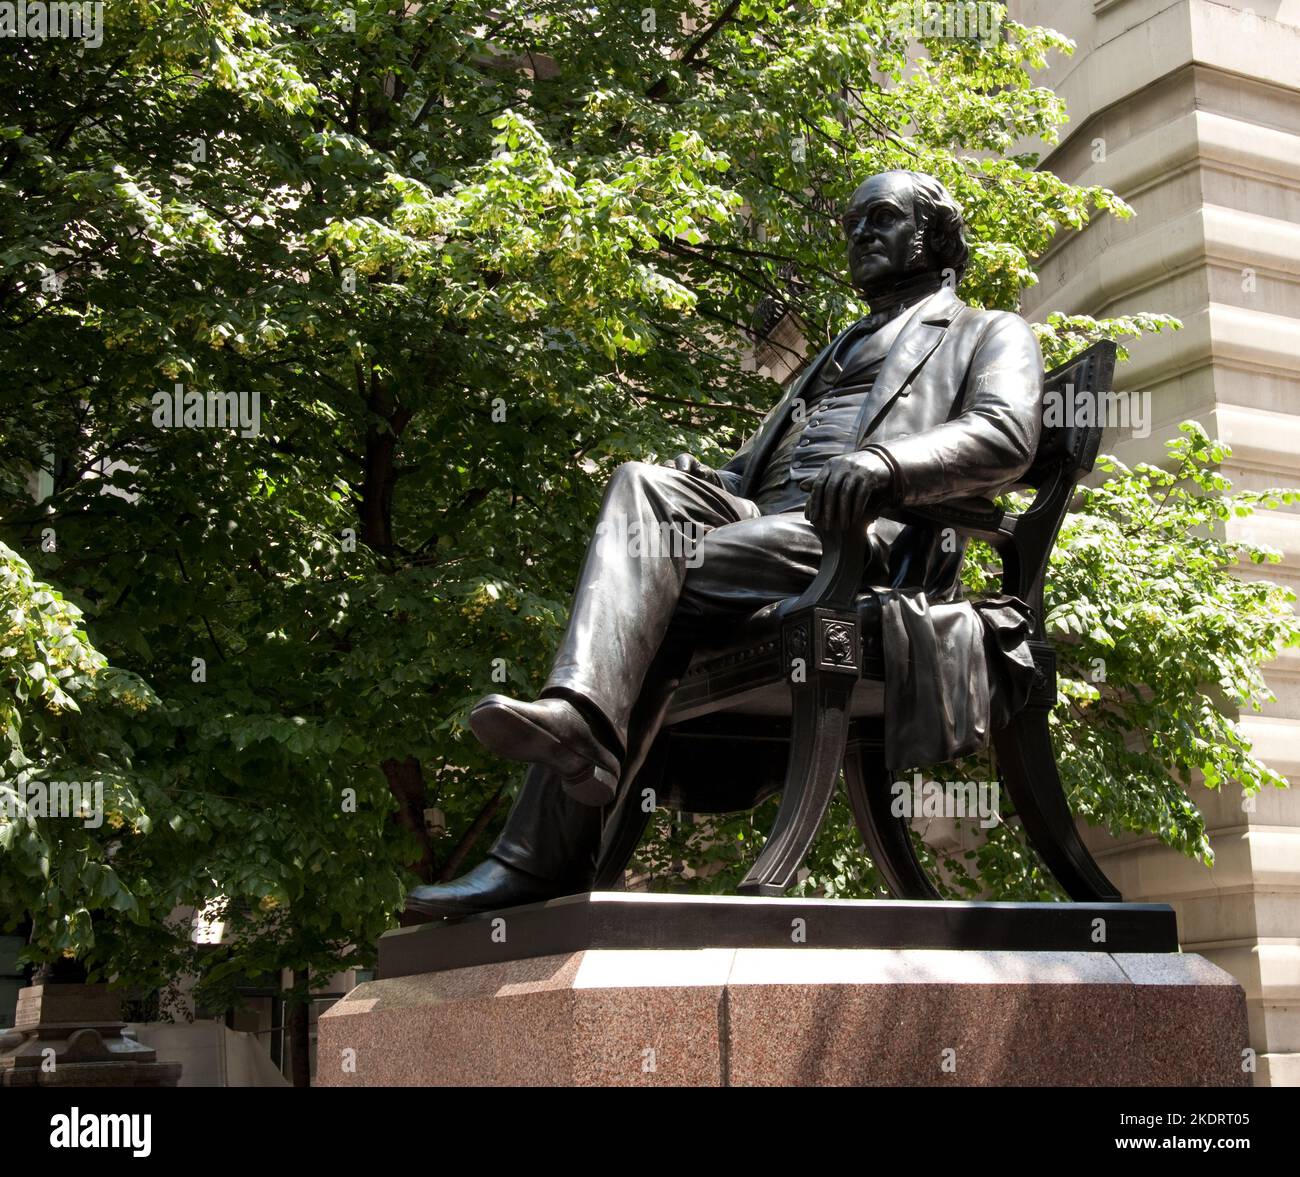 Statue of George Peabody (Founder of the Peabody Trust), The City, London, UK - the Peabody Trust aimed to provide reasonable housing for the poor. Stock Photo